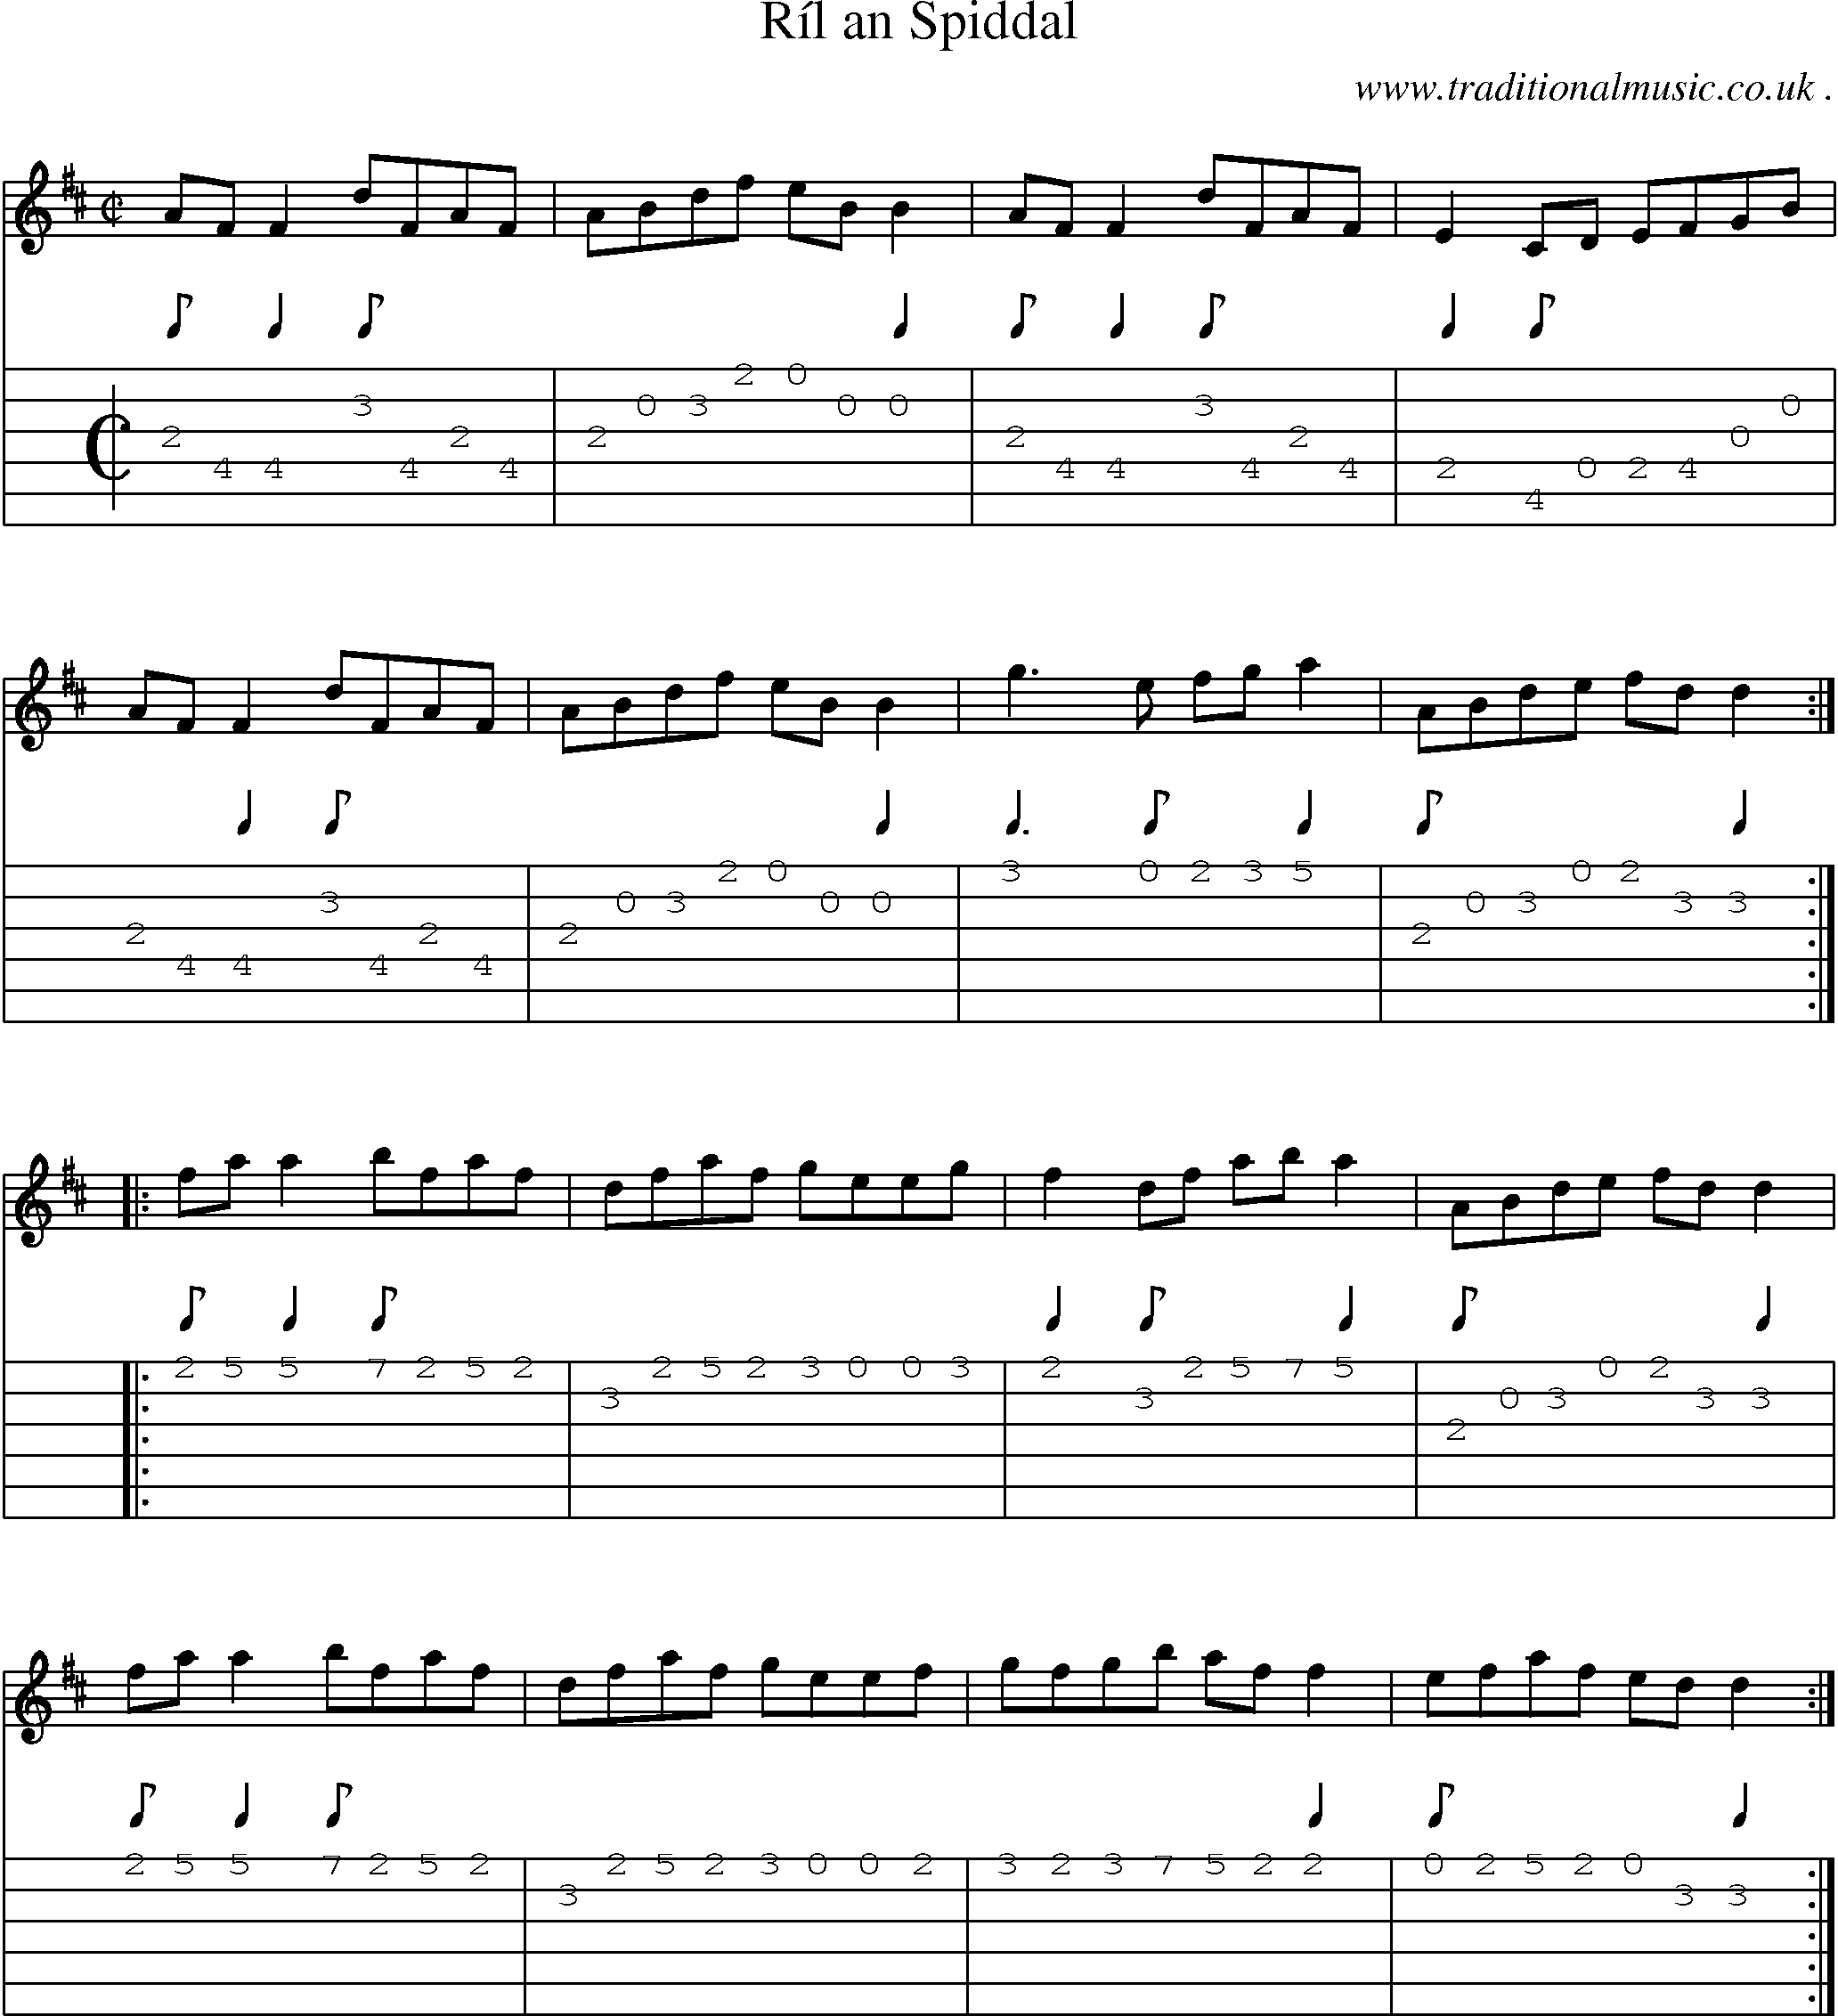 Sheet-Music and Guitar Tabs for Ril An Spiddal